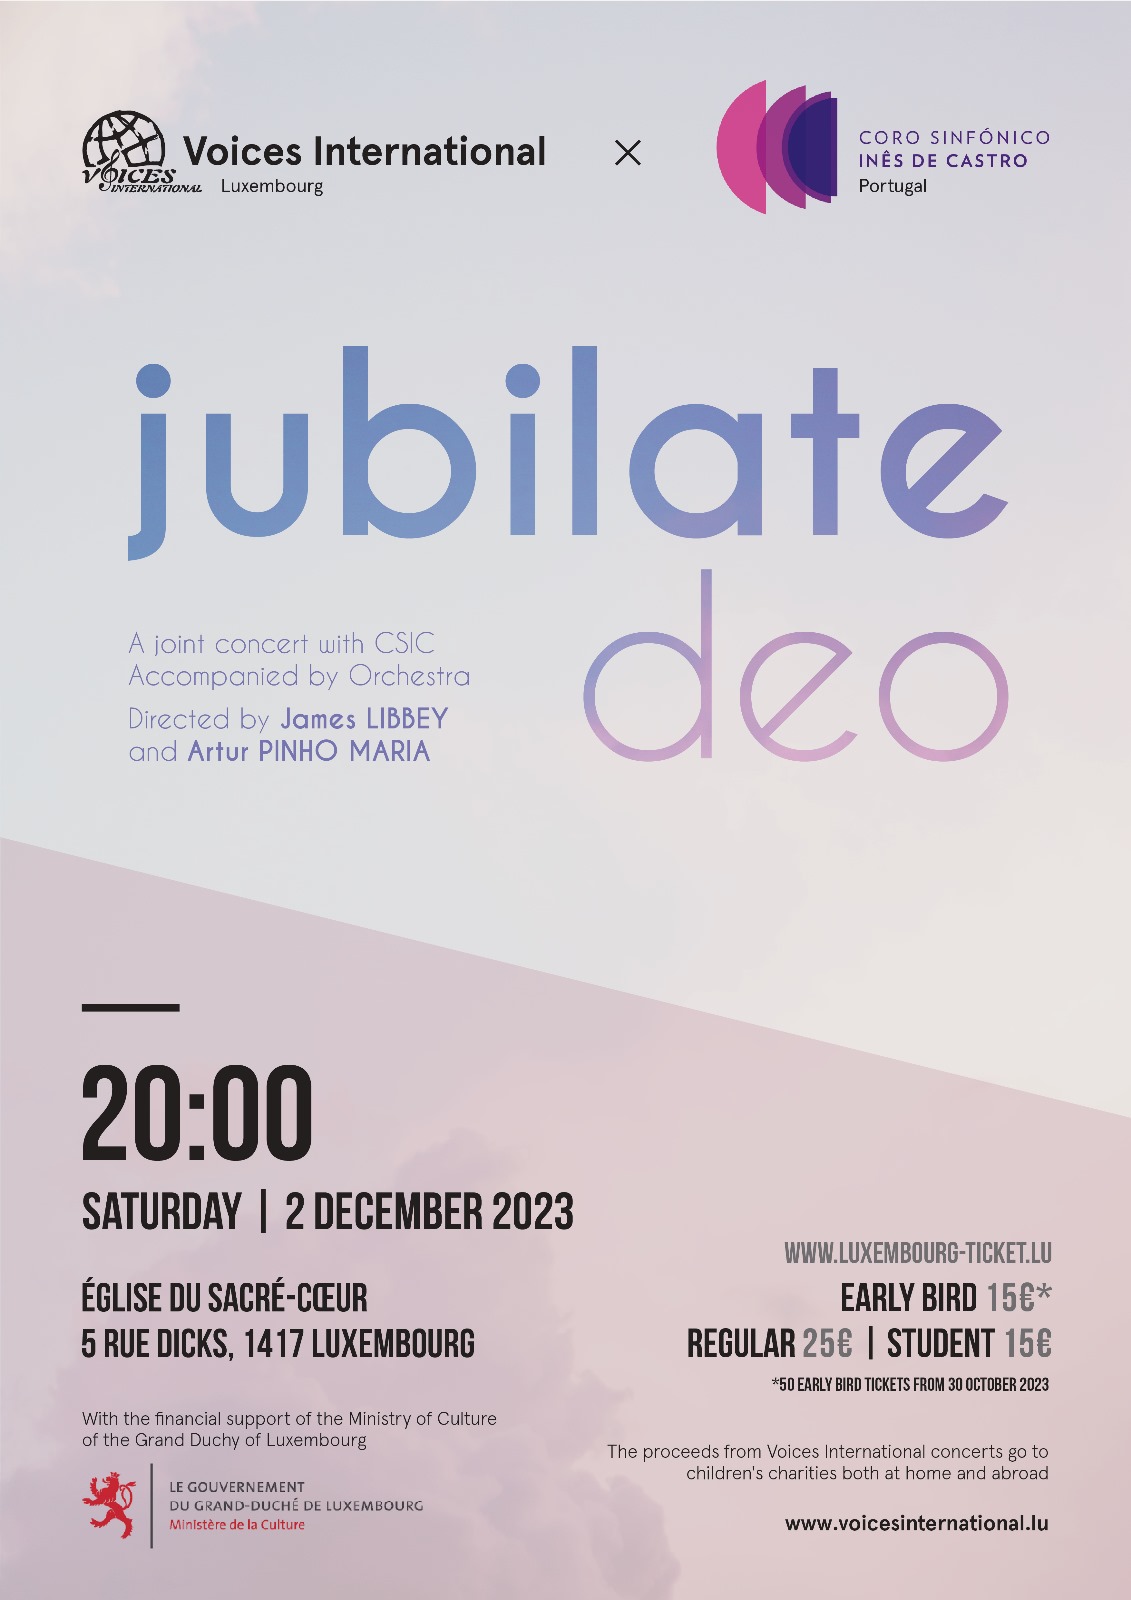 Dan Forrest’s "Jubilate Deo" - concert by Voices International and Coro Sinfónico Inês de Castro